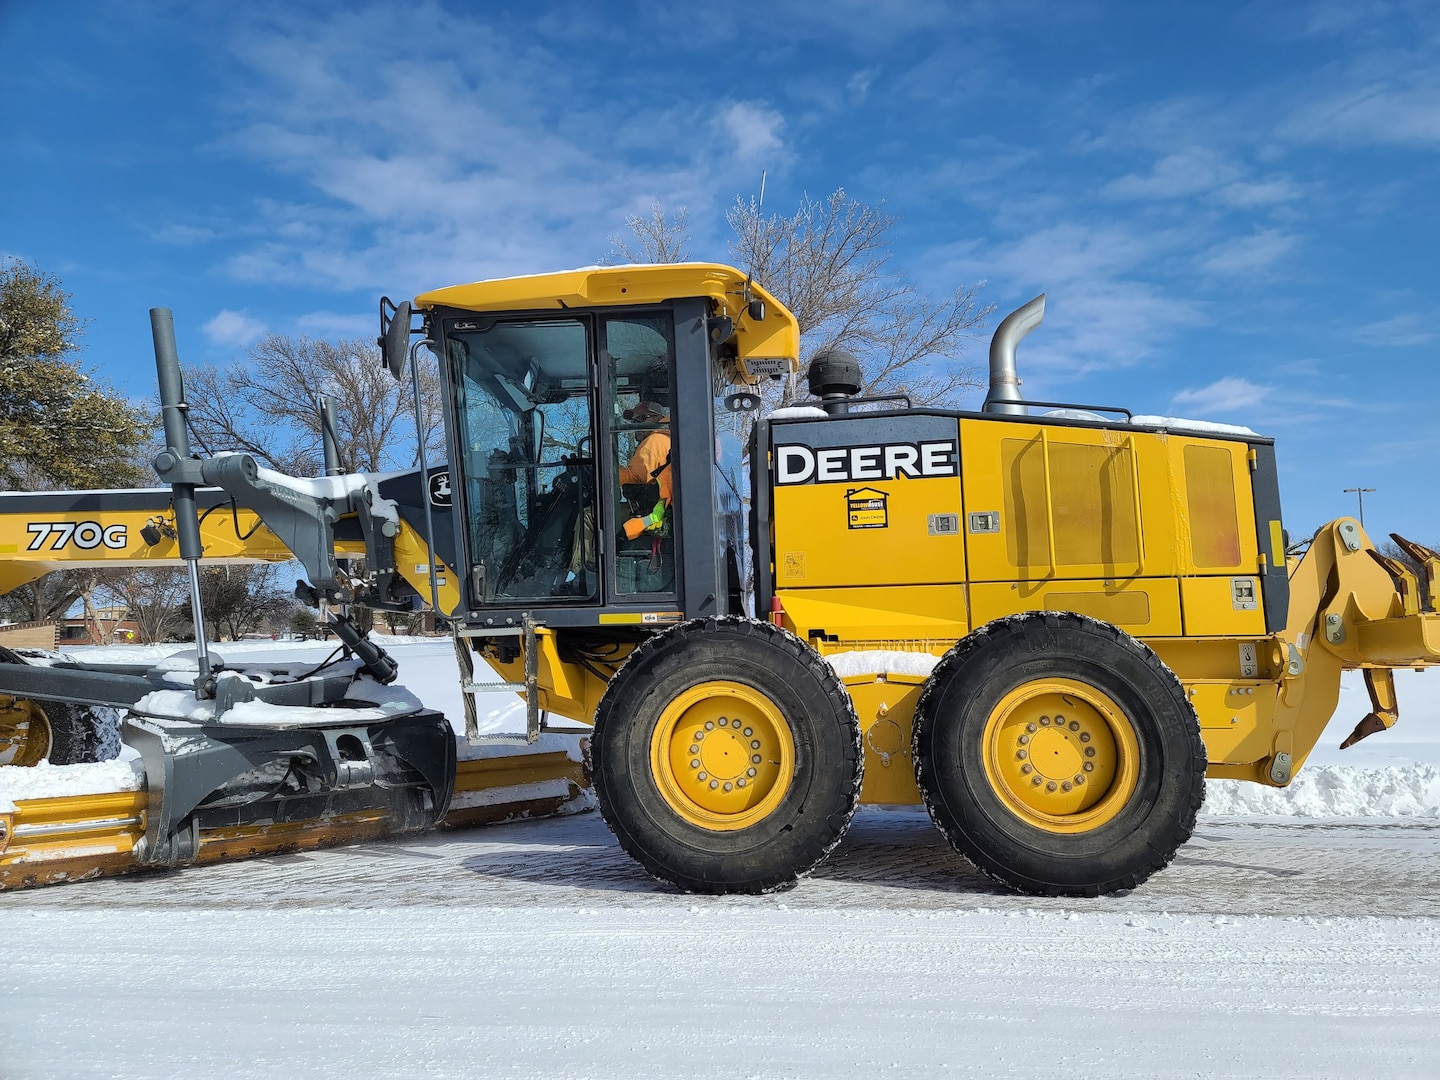 A member of the snow removal team plows the troop walk on Goodfellow Air Force Base, Texas, Feb. 15, 2021. The base rented a grader from downtown to remove the snow from roads across the installation. (U.S. Air Force photo by Airman 1st Class Michael Bowman)